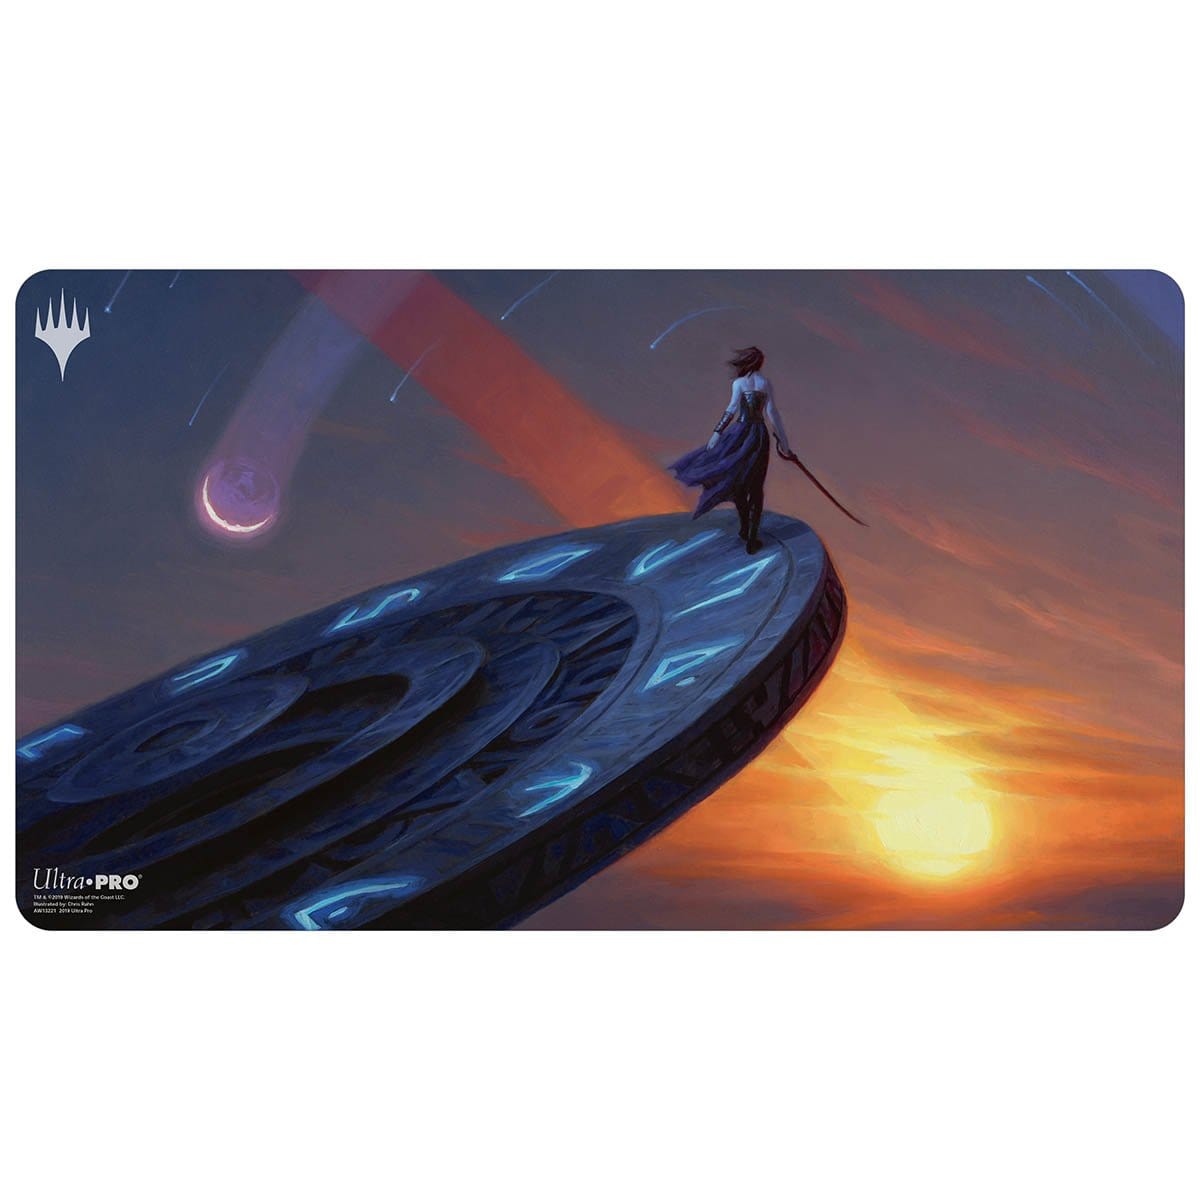 Time Walk Playmat - Playmat - Original Magic Art - Accessories for Magic the Gathering and other card games